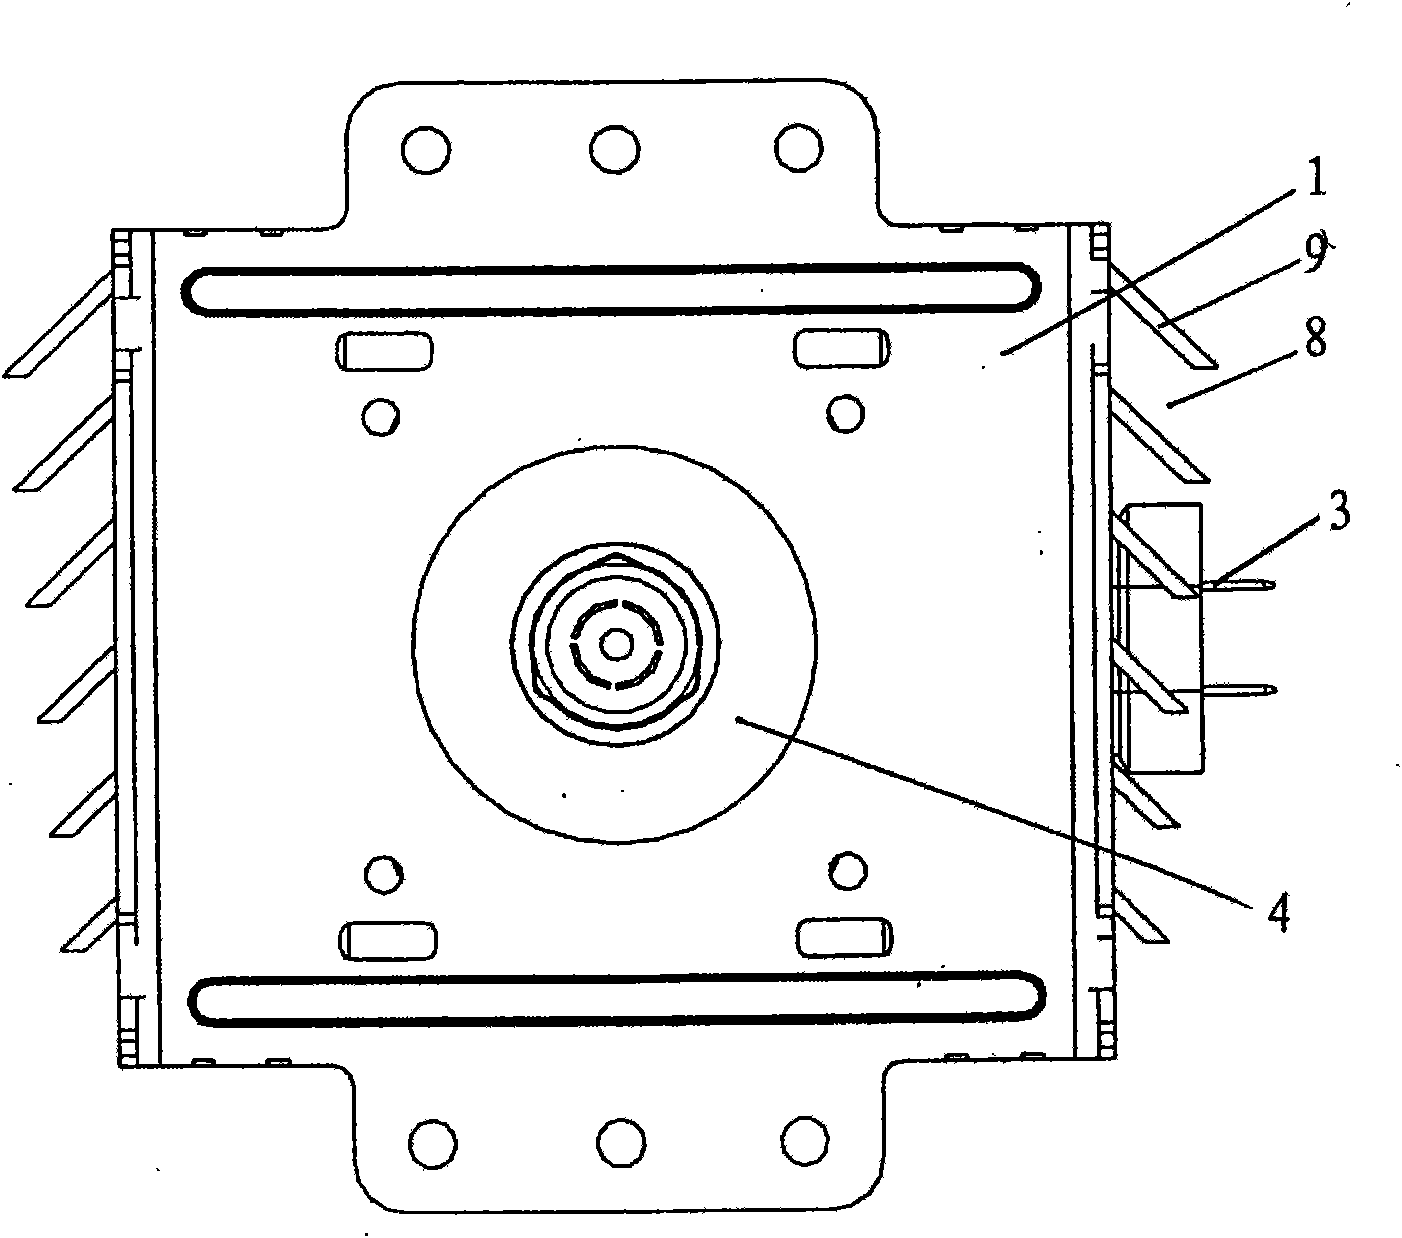 Radiating structure of shell having stream guidance opening of microwave oven magnetron